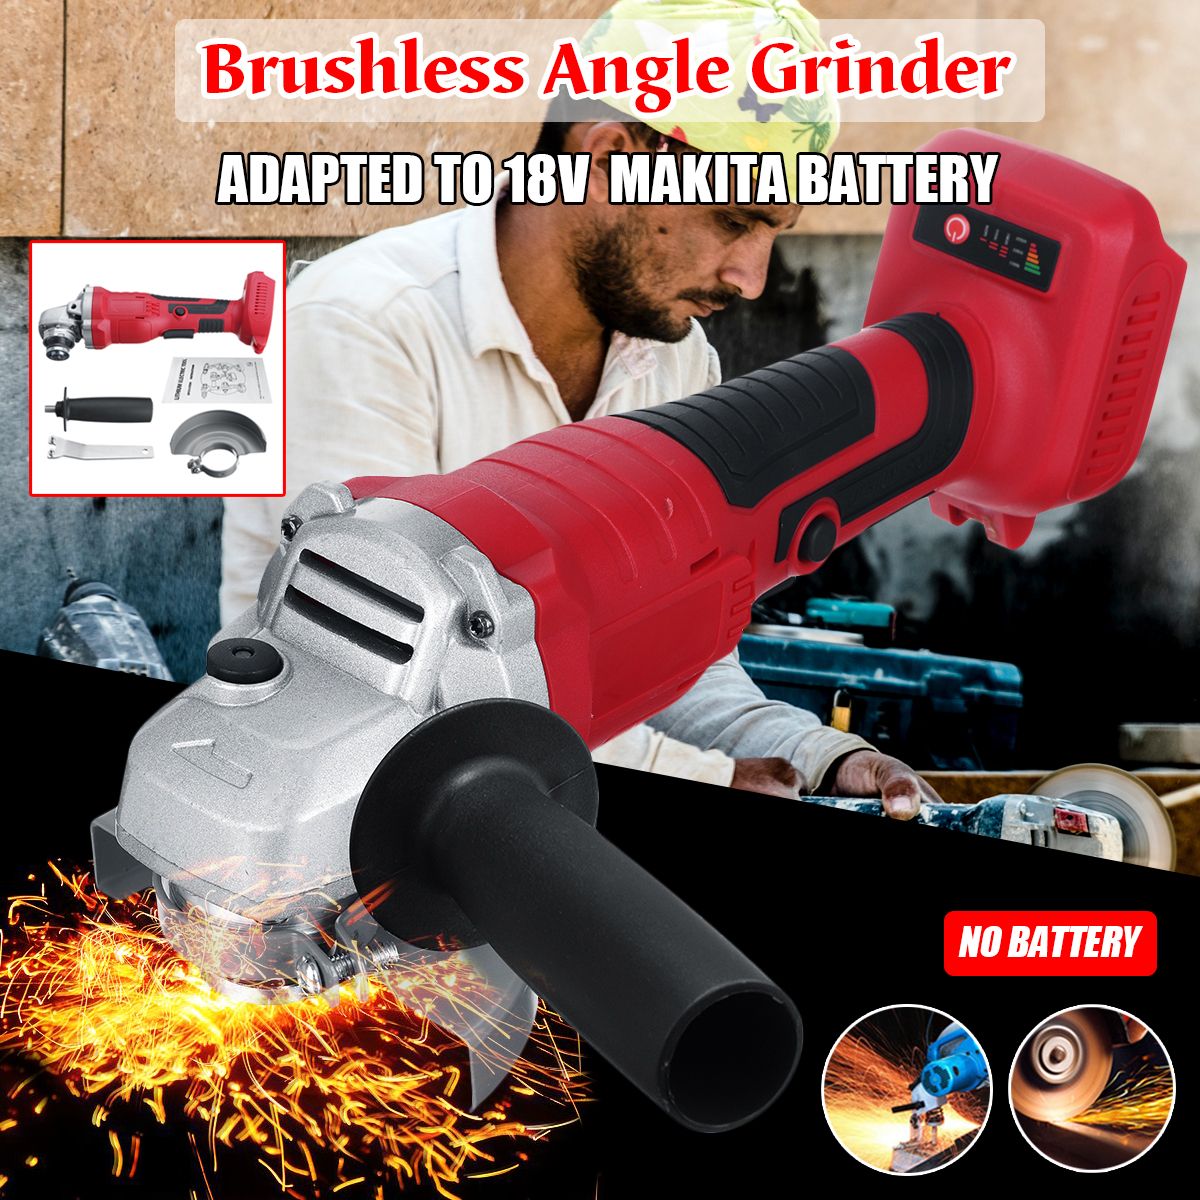 800W-Cordless-Brushless-Angle-Grinder-Adapted-To-18V-Makita-Battery-1635605